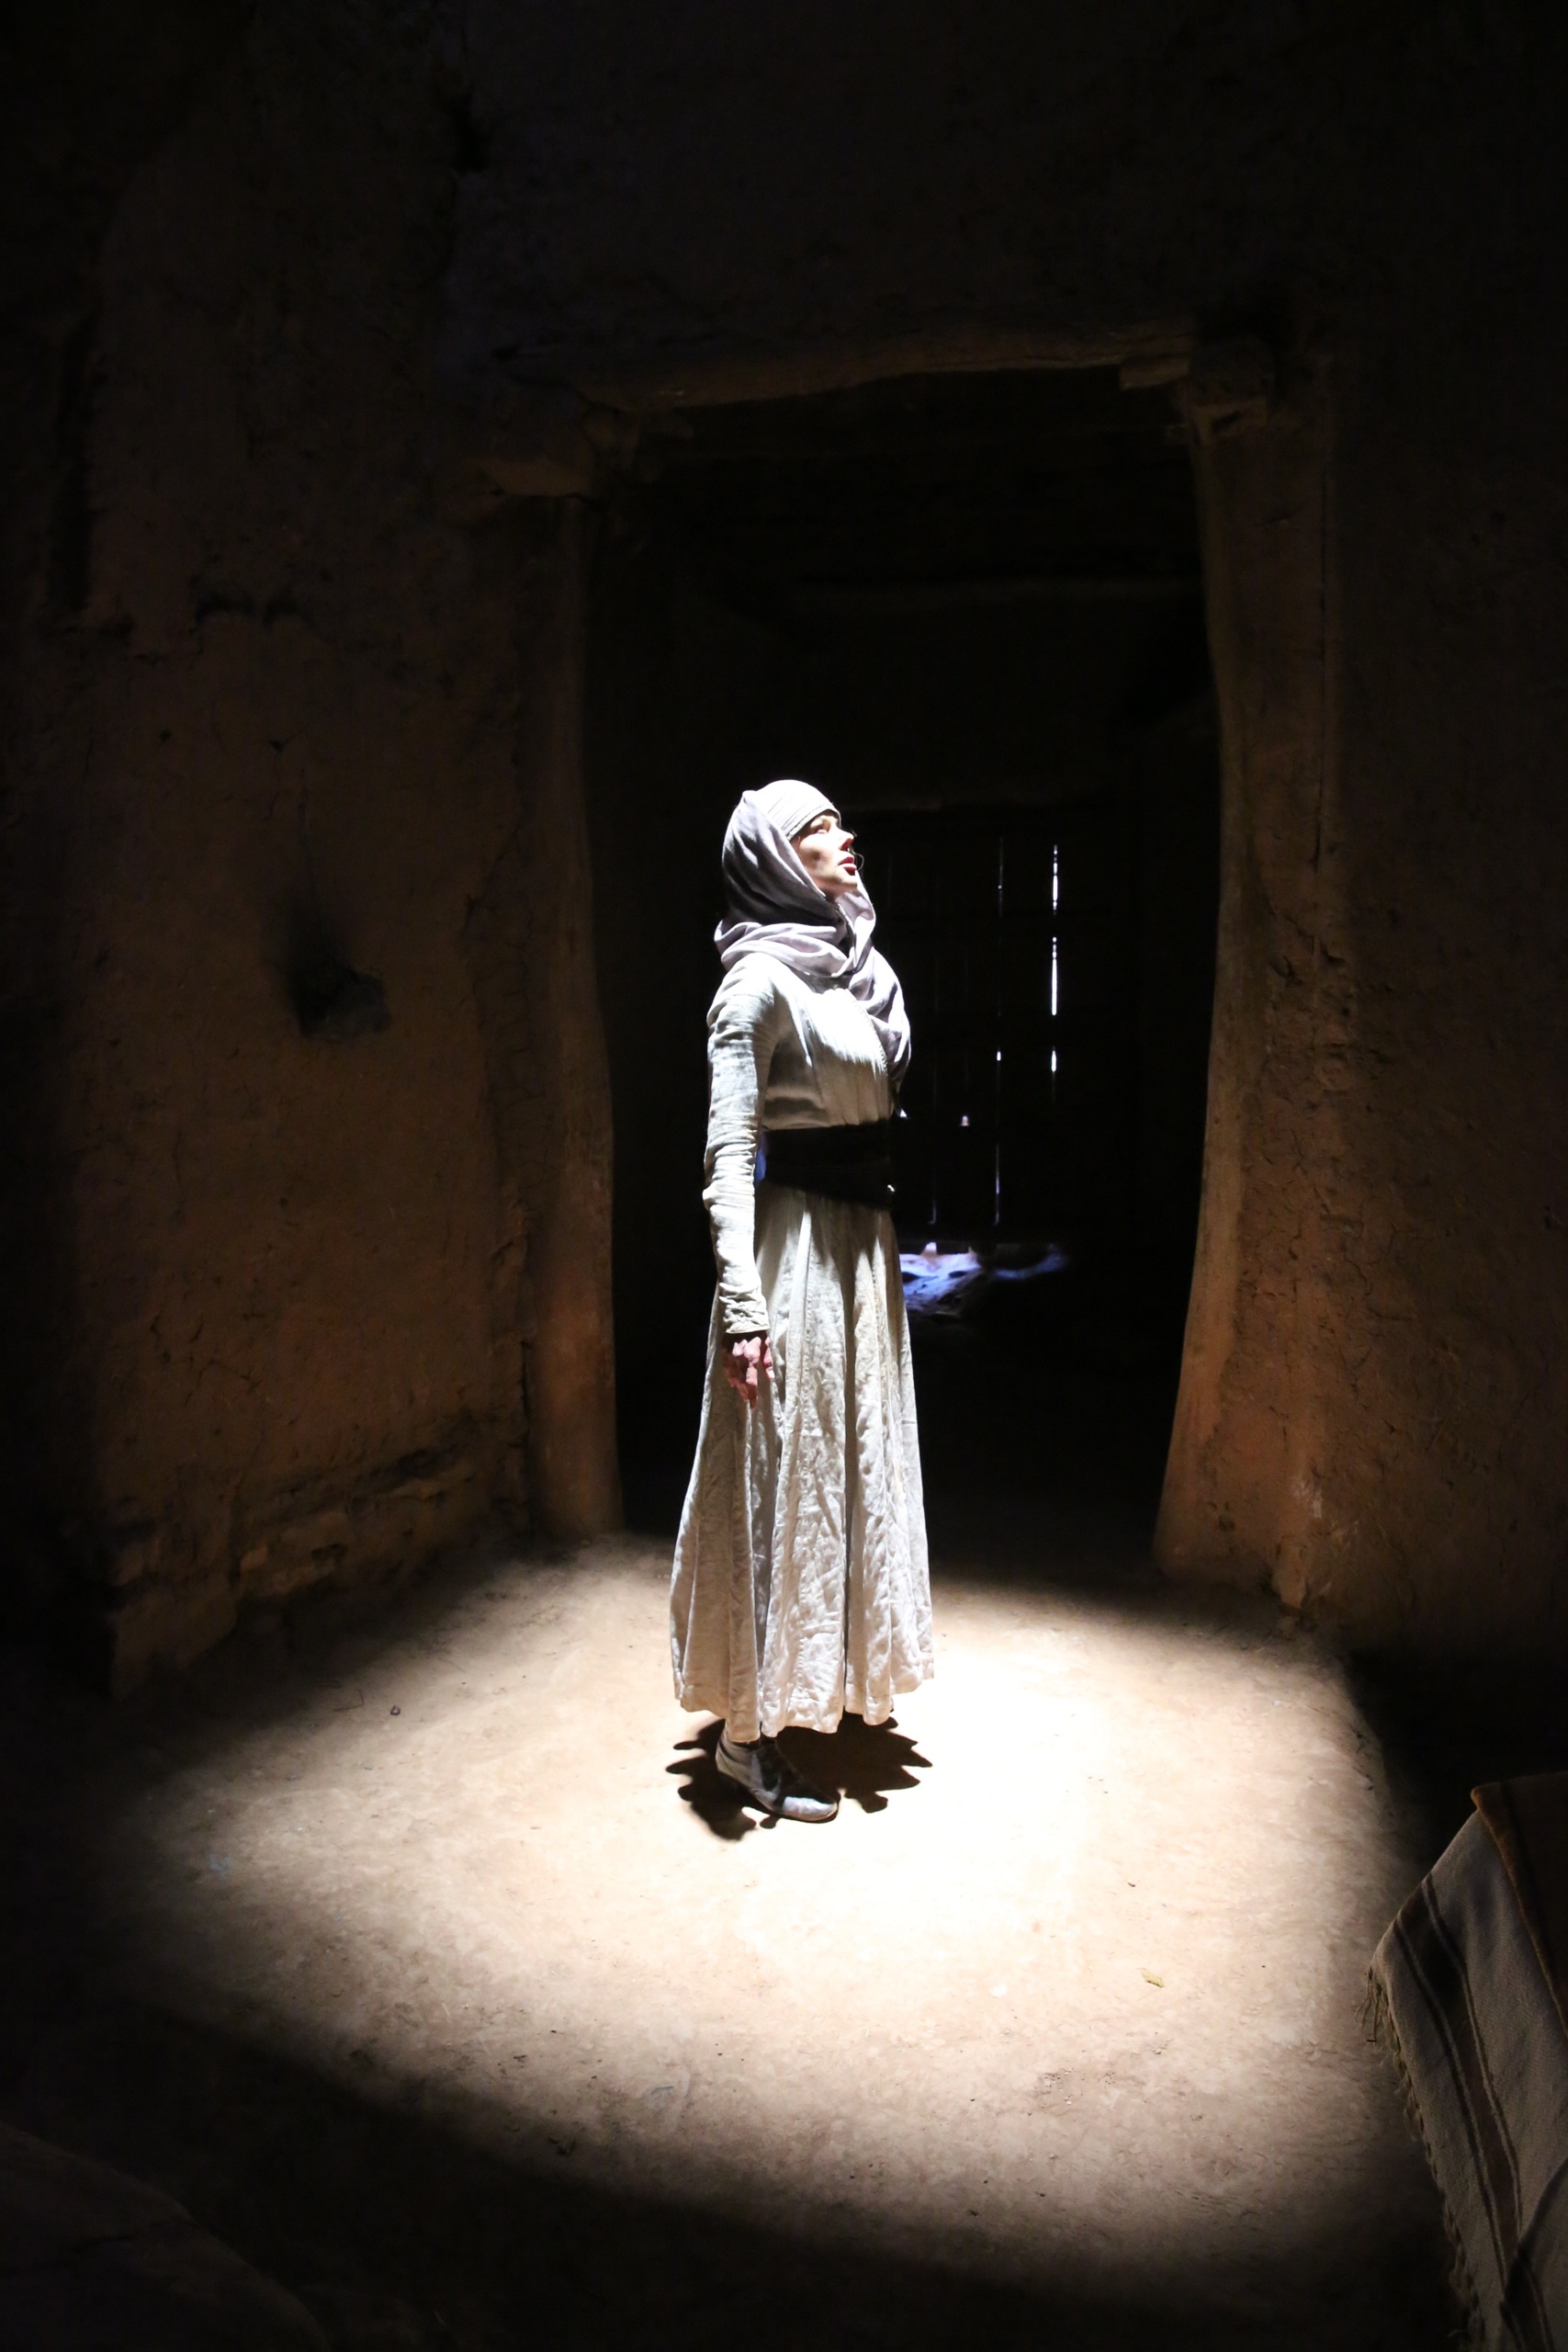 A woman stands in a dark room in the glow of a bright light shining in from above. She wears a light dress and a headscarf.